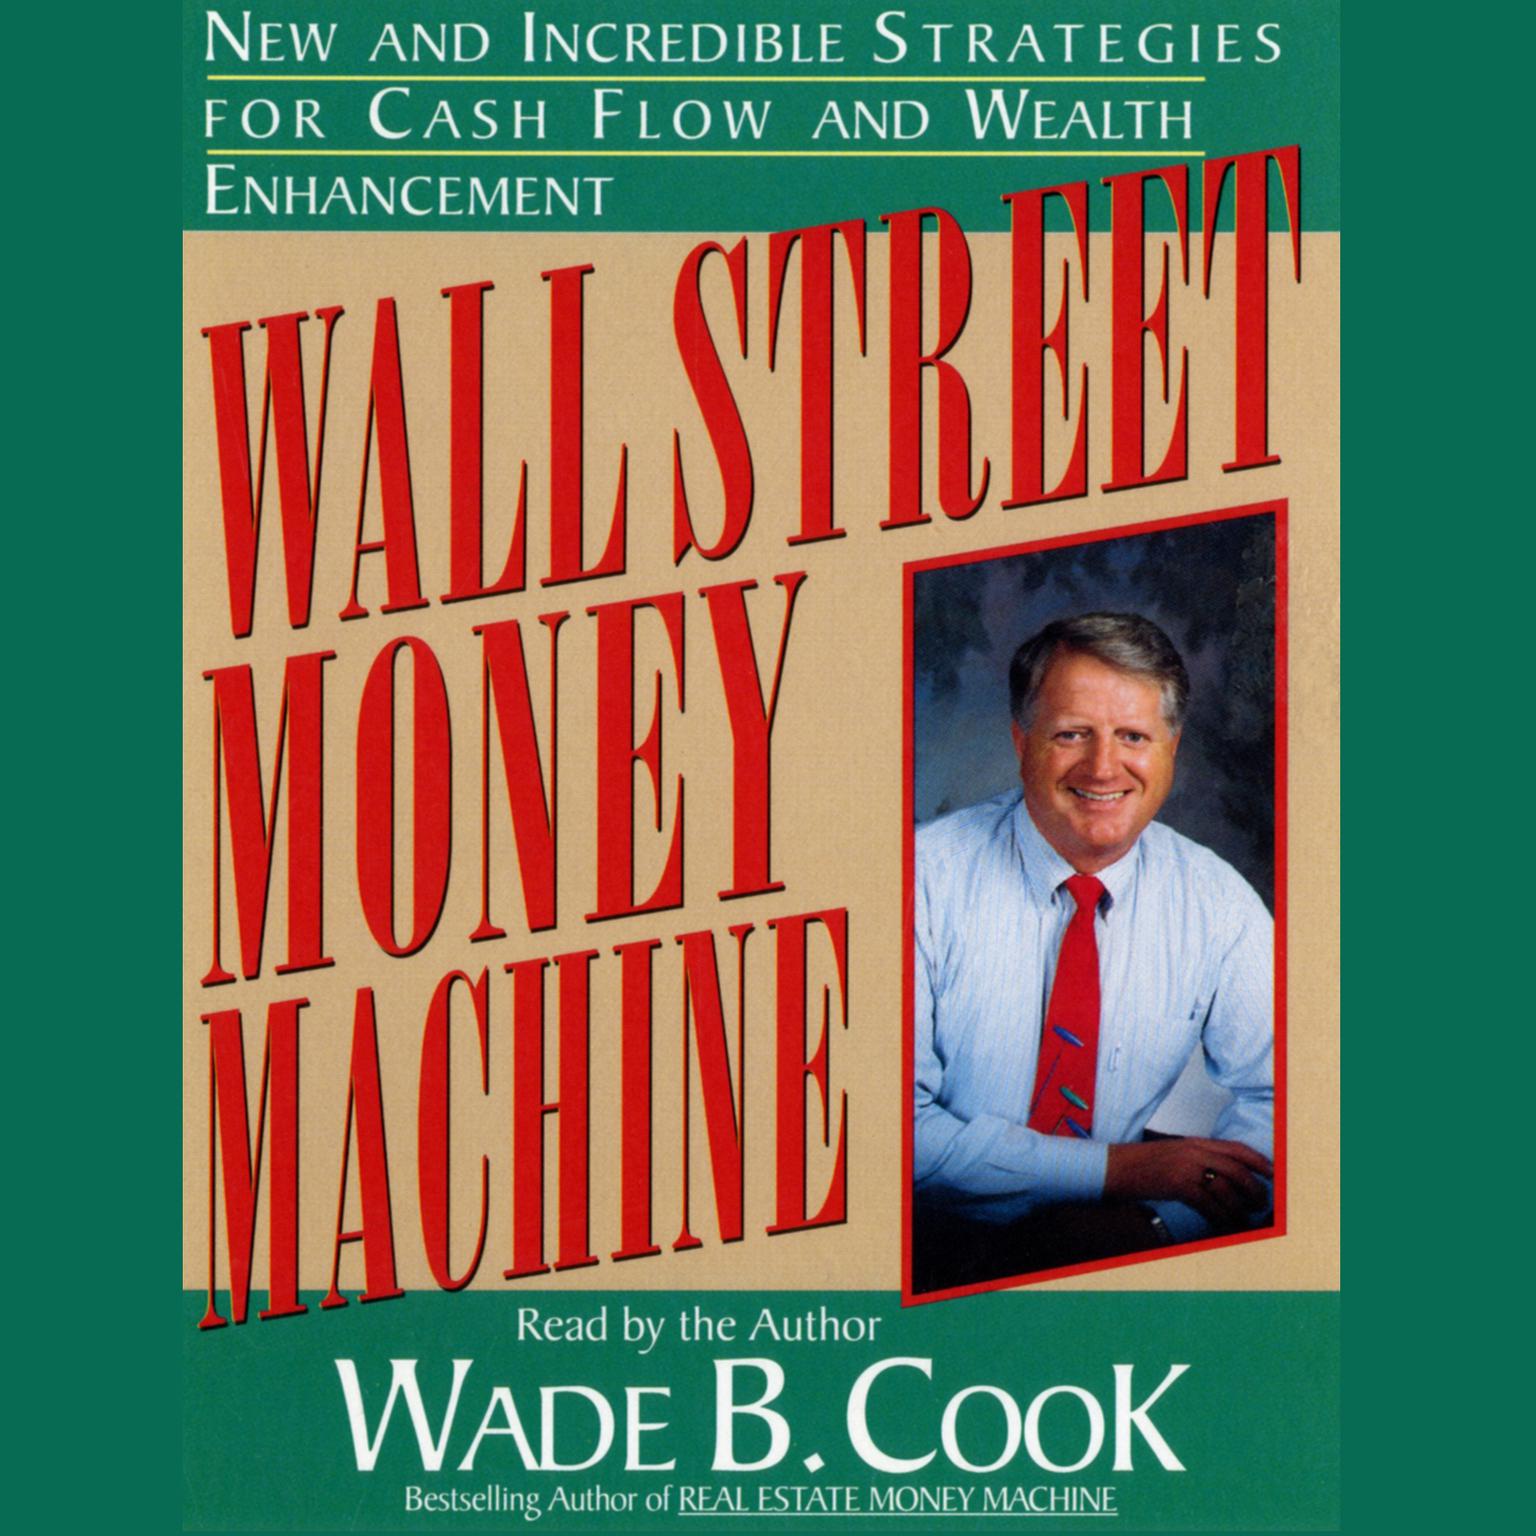 Wall Street Money Machine (Abridged): New and Incredible Strategies for Cash Flow and Wealth Enhancement Audiobook, by Wade B. Cook